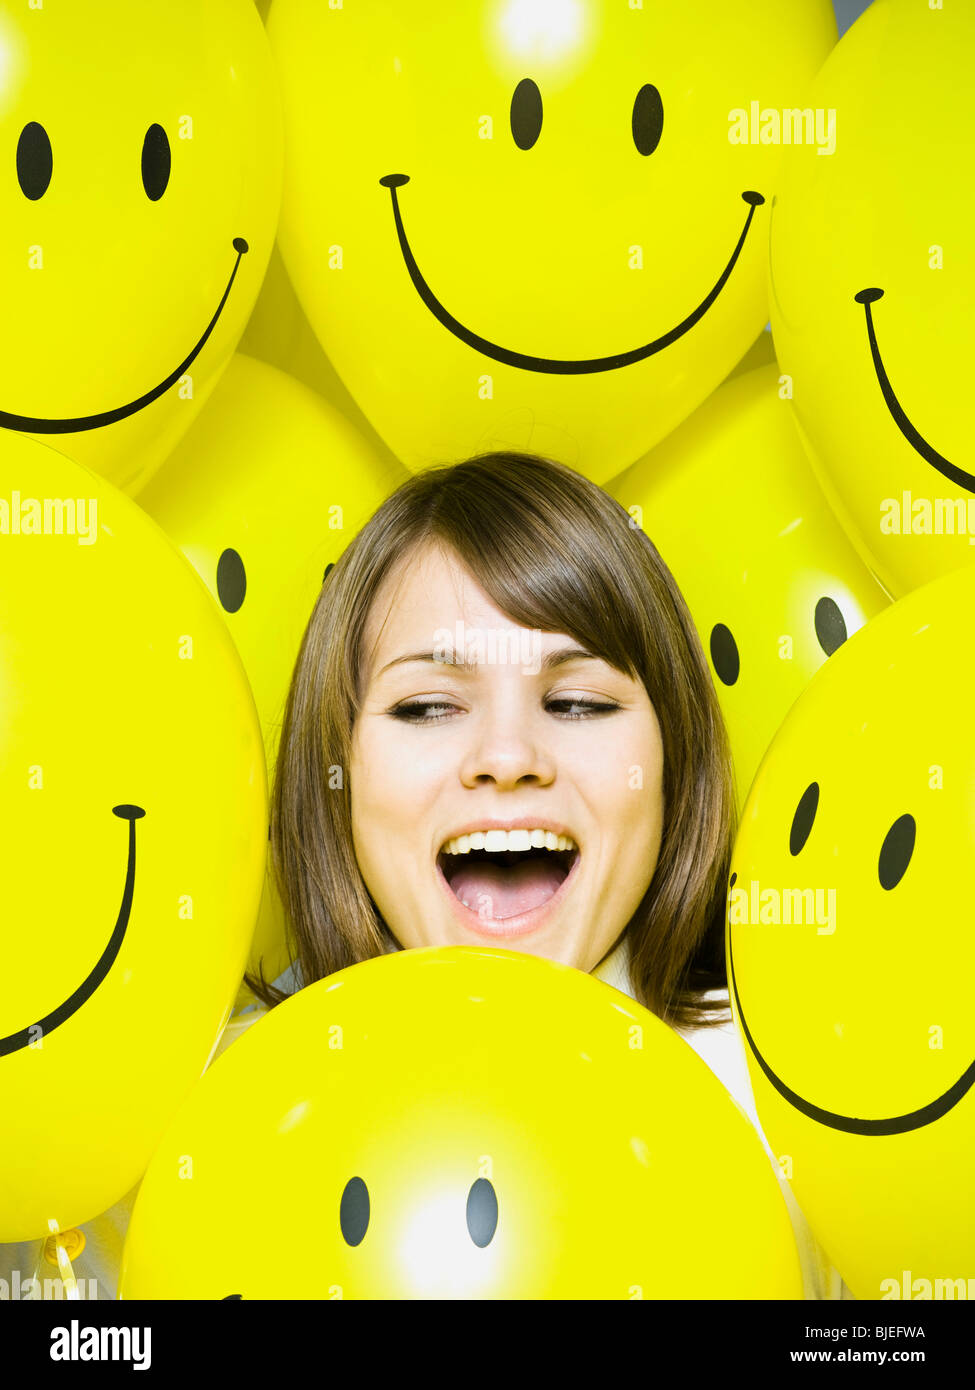 woman with smiley face balloons Stock Photo